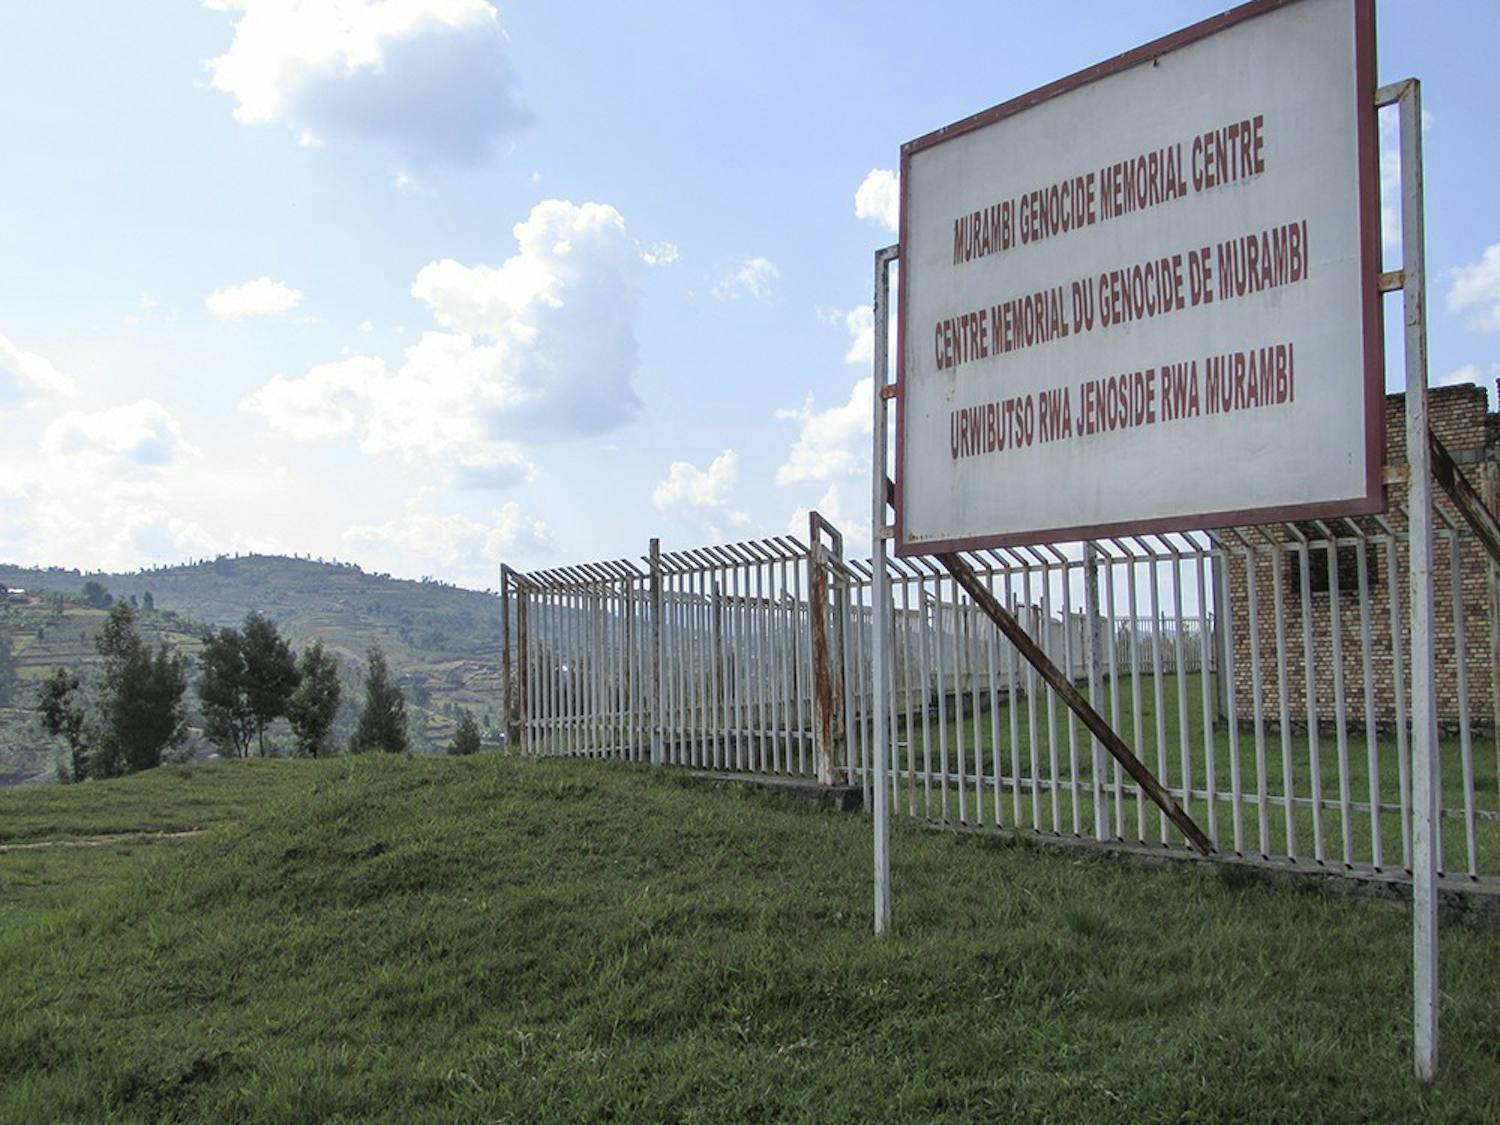 The Murambi Genocide Memorial Centre in the Murambi district in southern Rwanda has small buildings where preserved bodies of genocide victims are controversially displayed, encased in lime after being exhumed from mass graves.